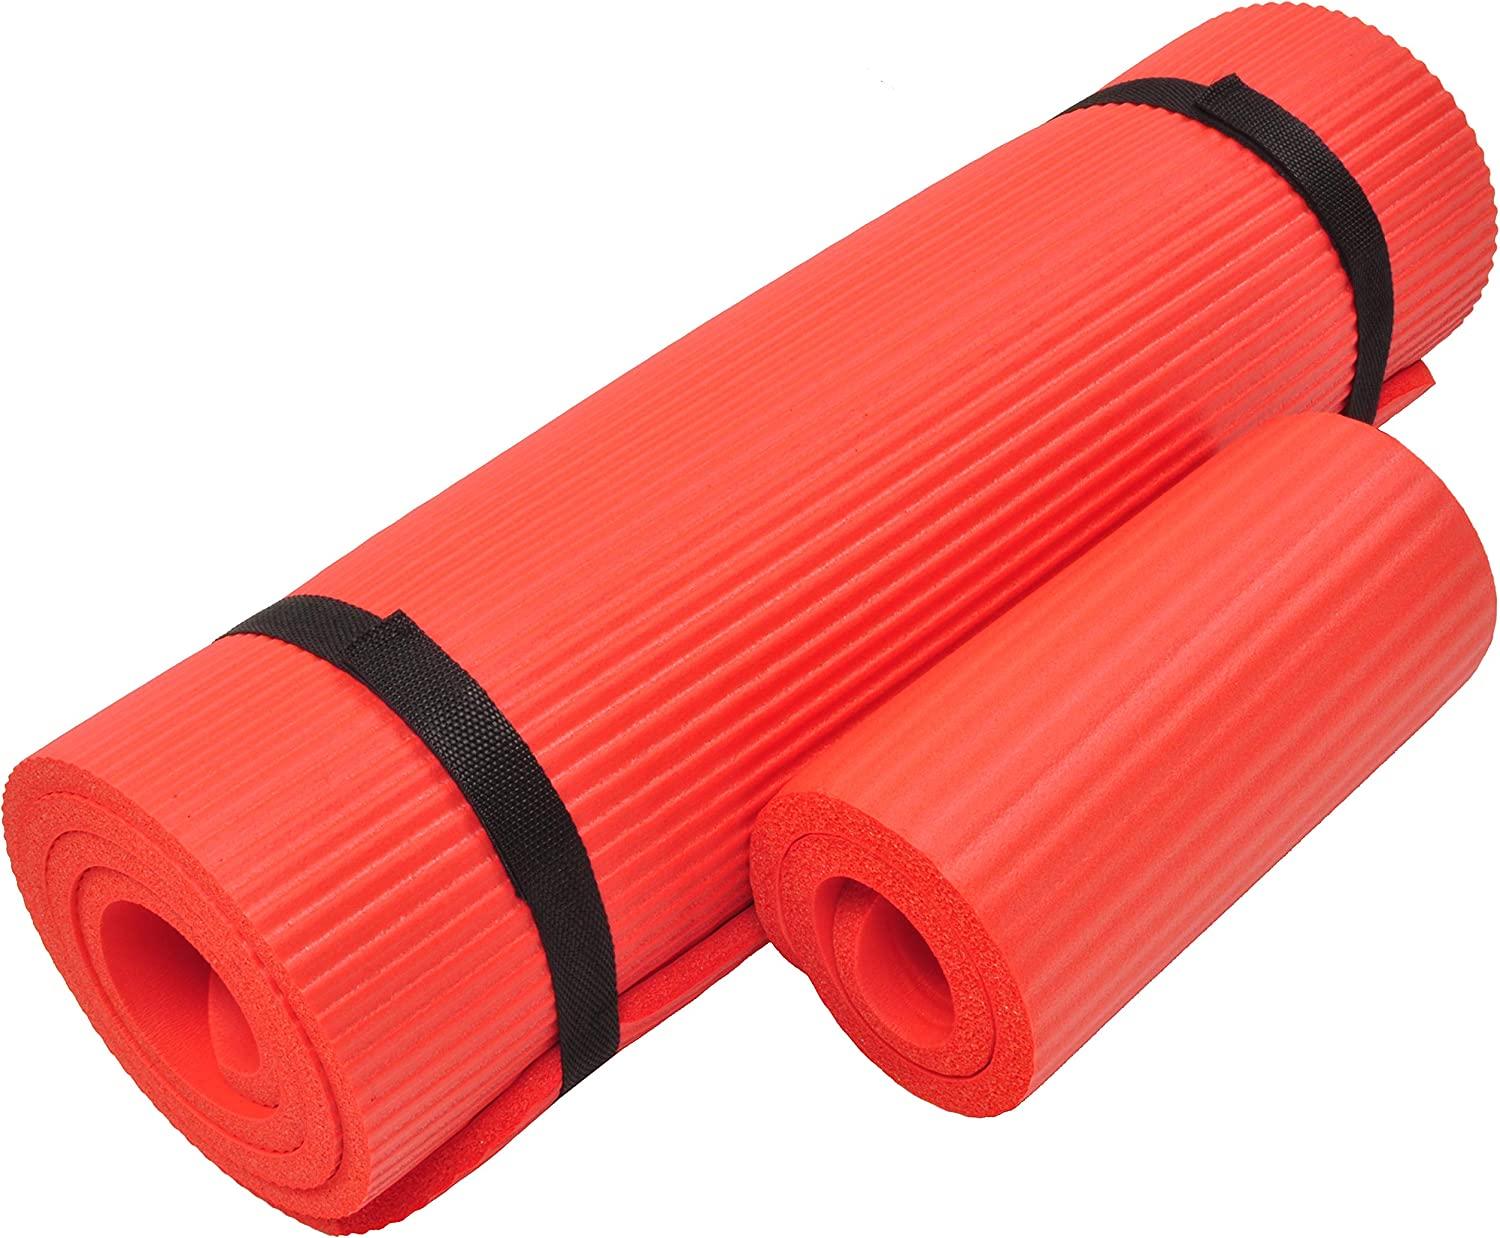 BalanceFrom All Purpose 0.5in Thick Extercise Yoga Mat for $9.90